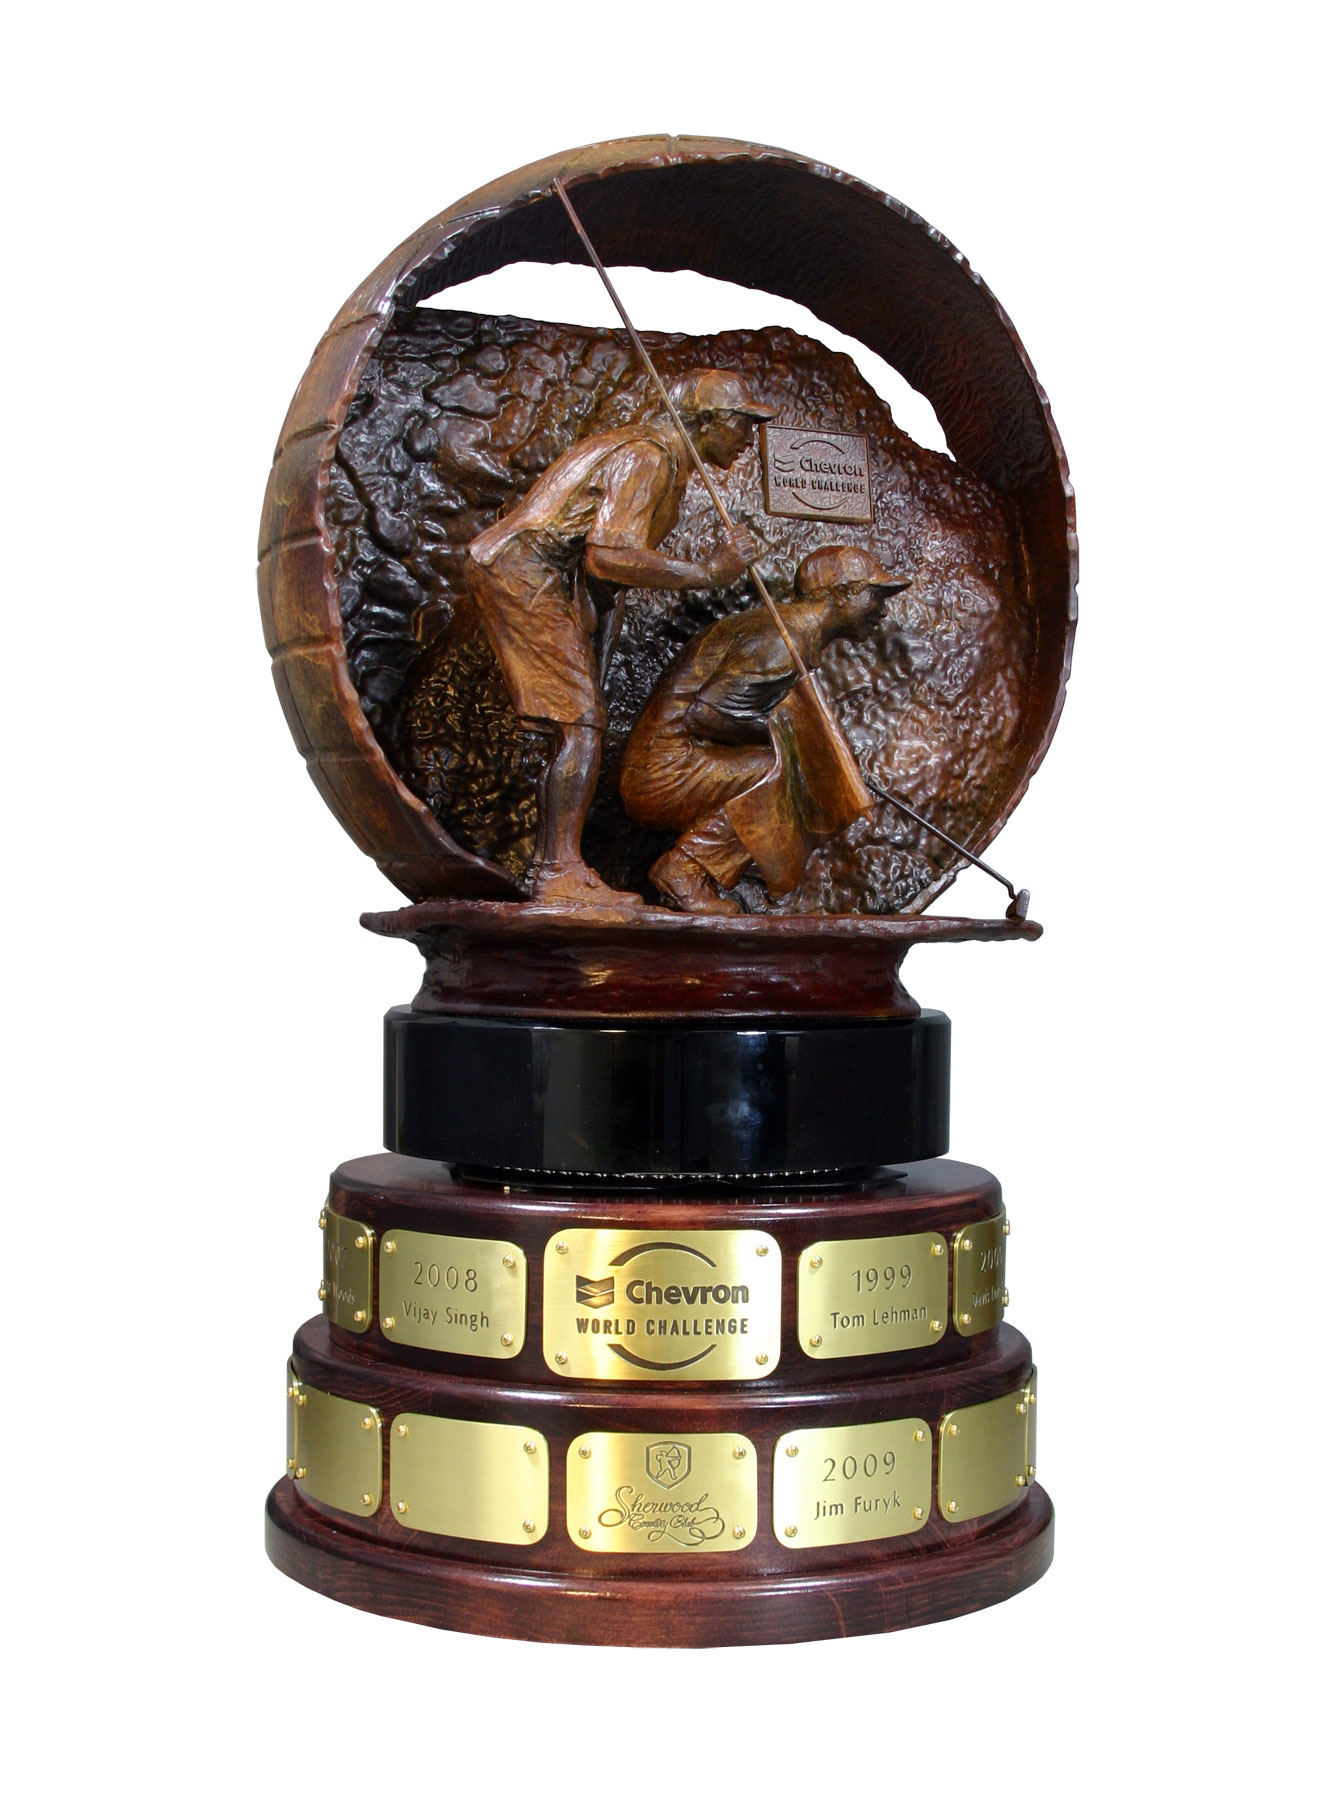 Chevron World Challenge trophy made by Malcolm DeMille- Side 1